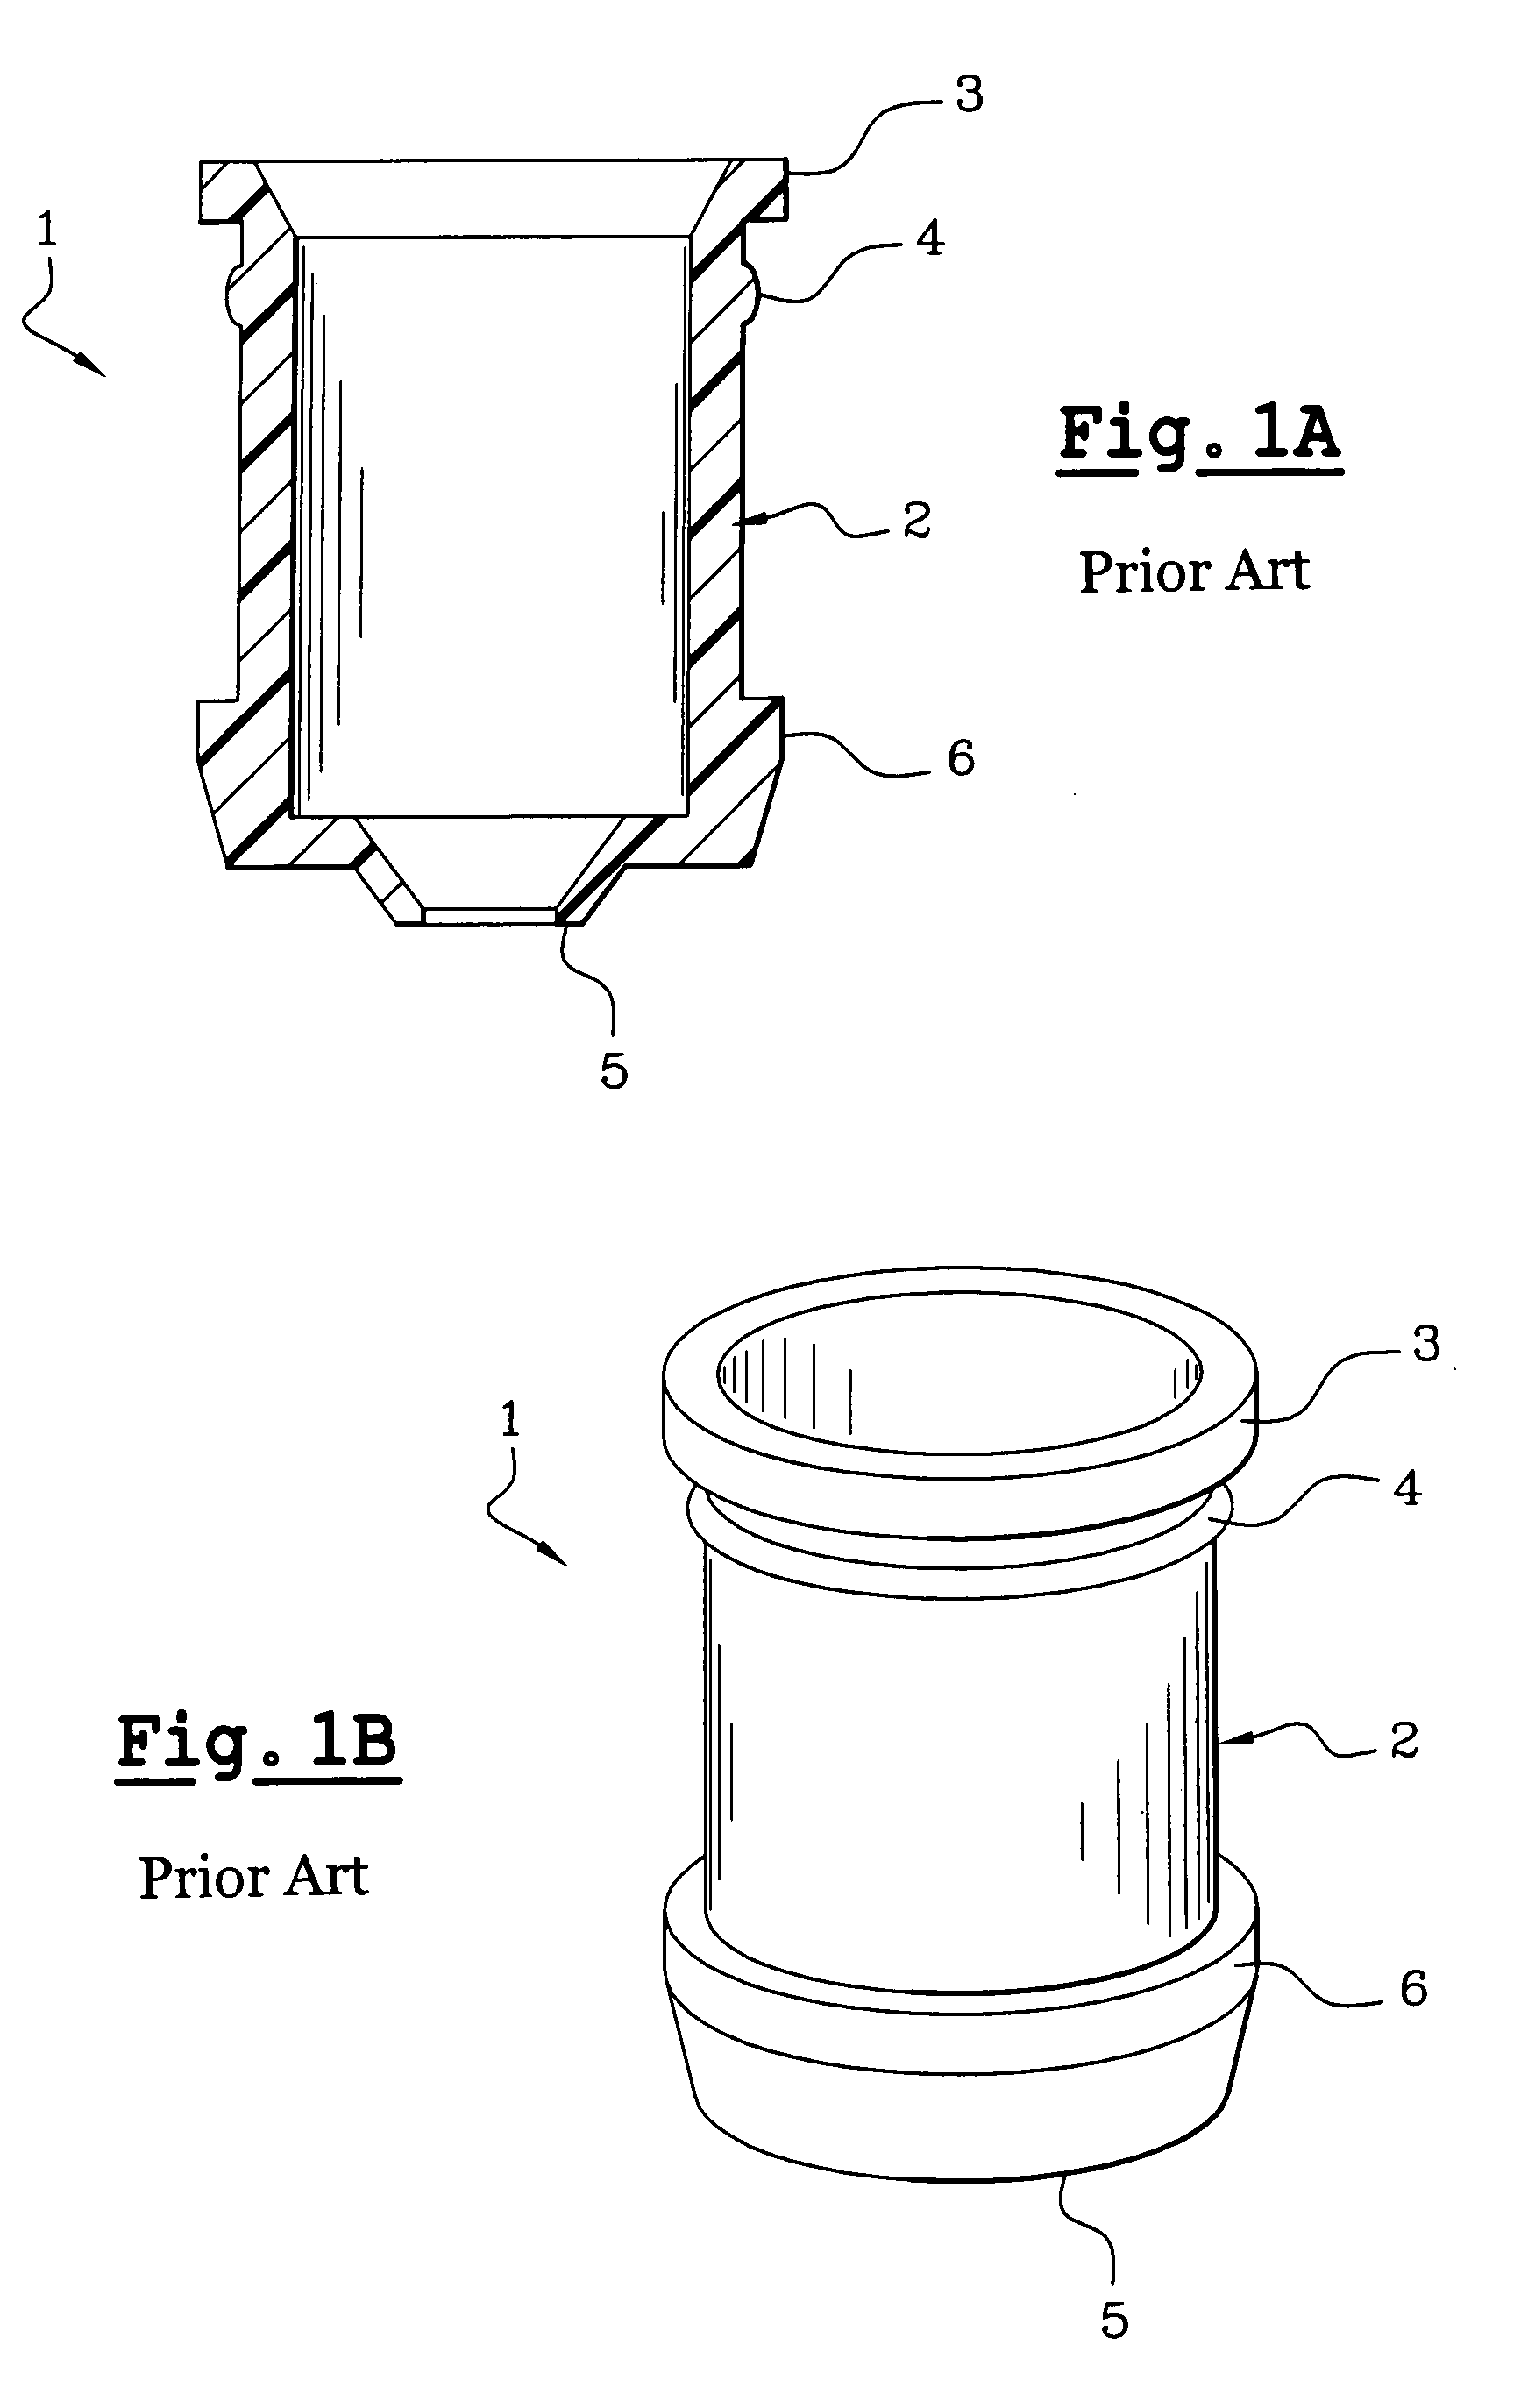 Easy-fit wiping device